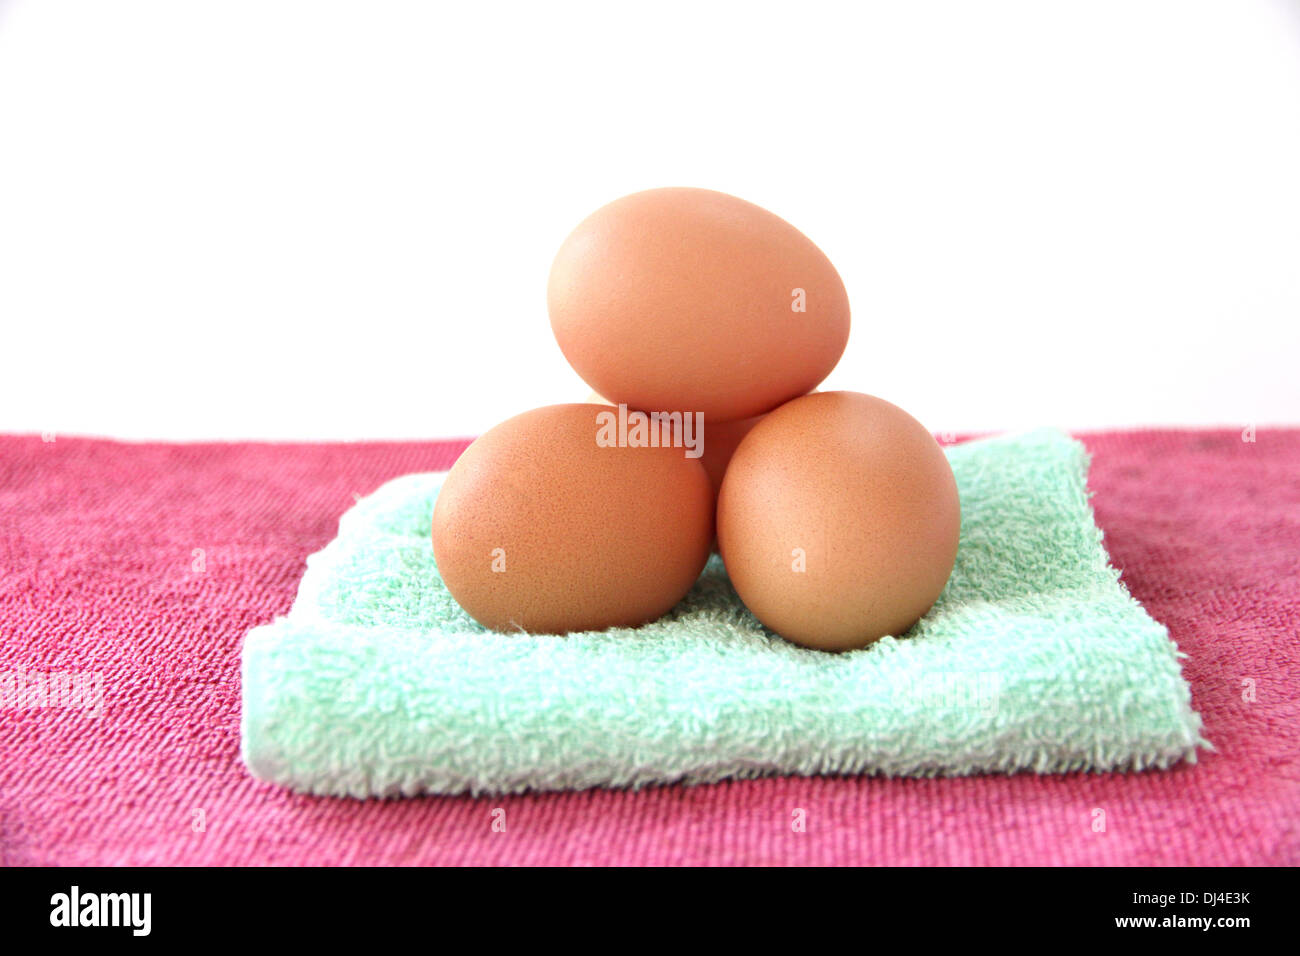 The picture Eggs on green and pink towel in white background. Stock Photo